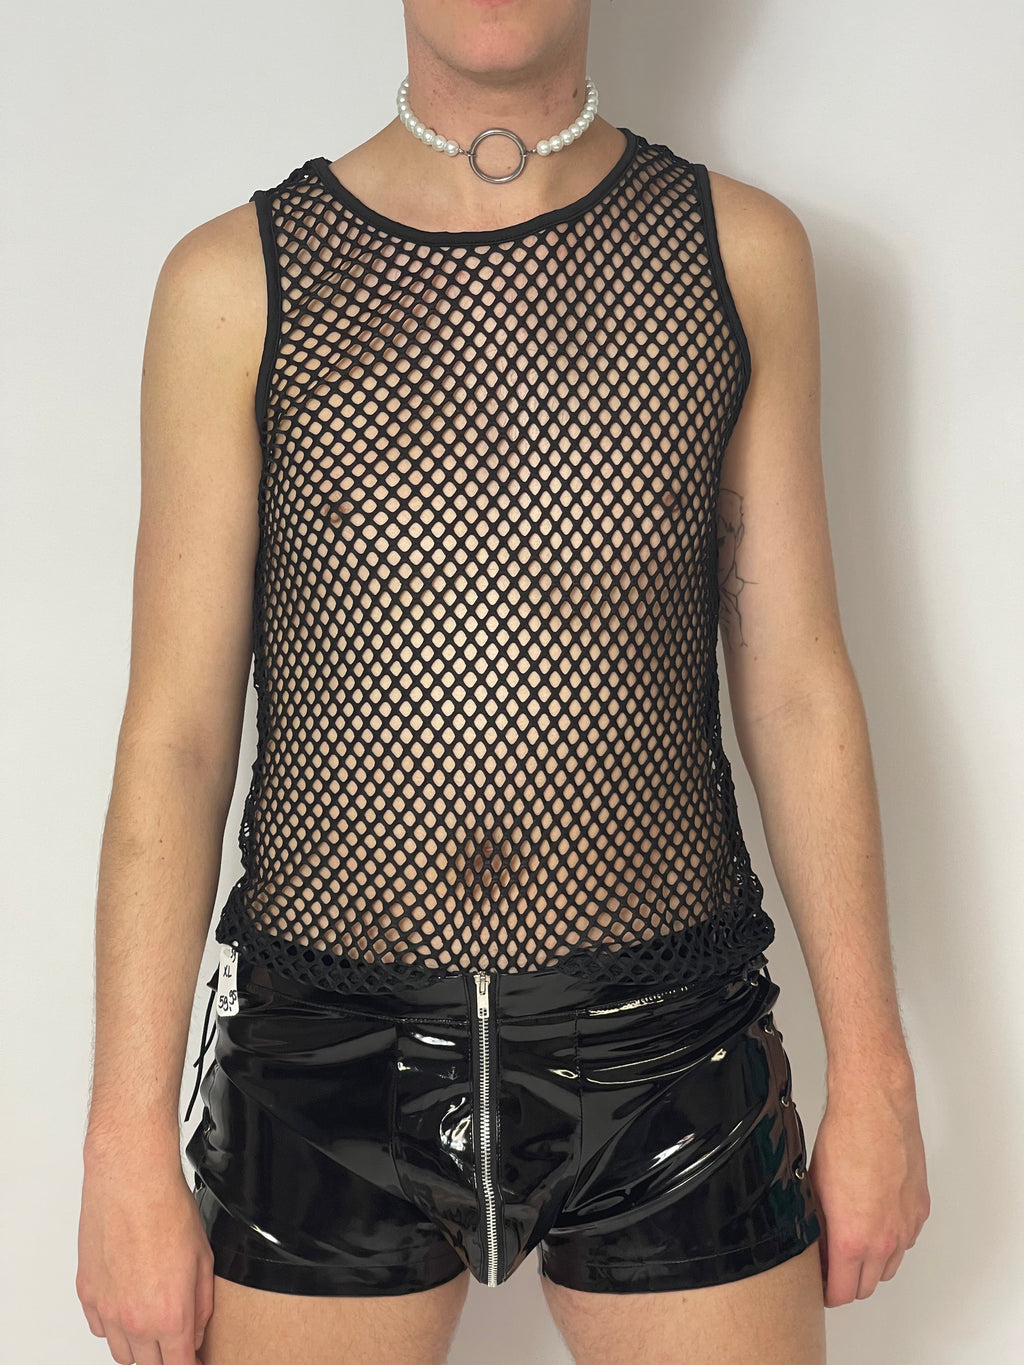 man met fishnet, techno outfit